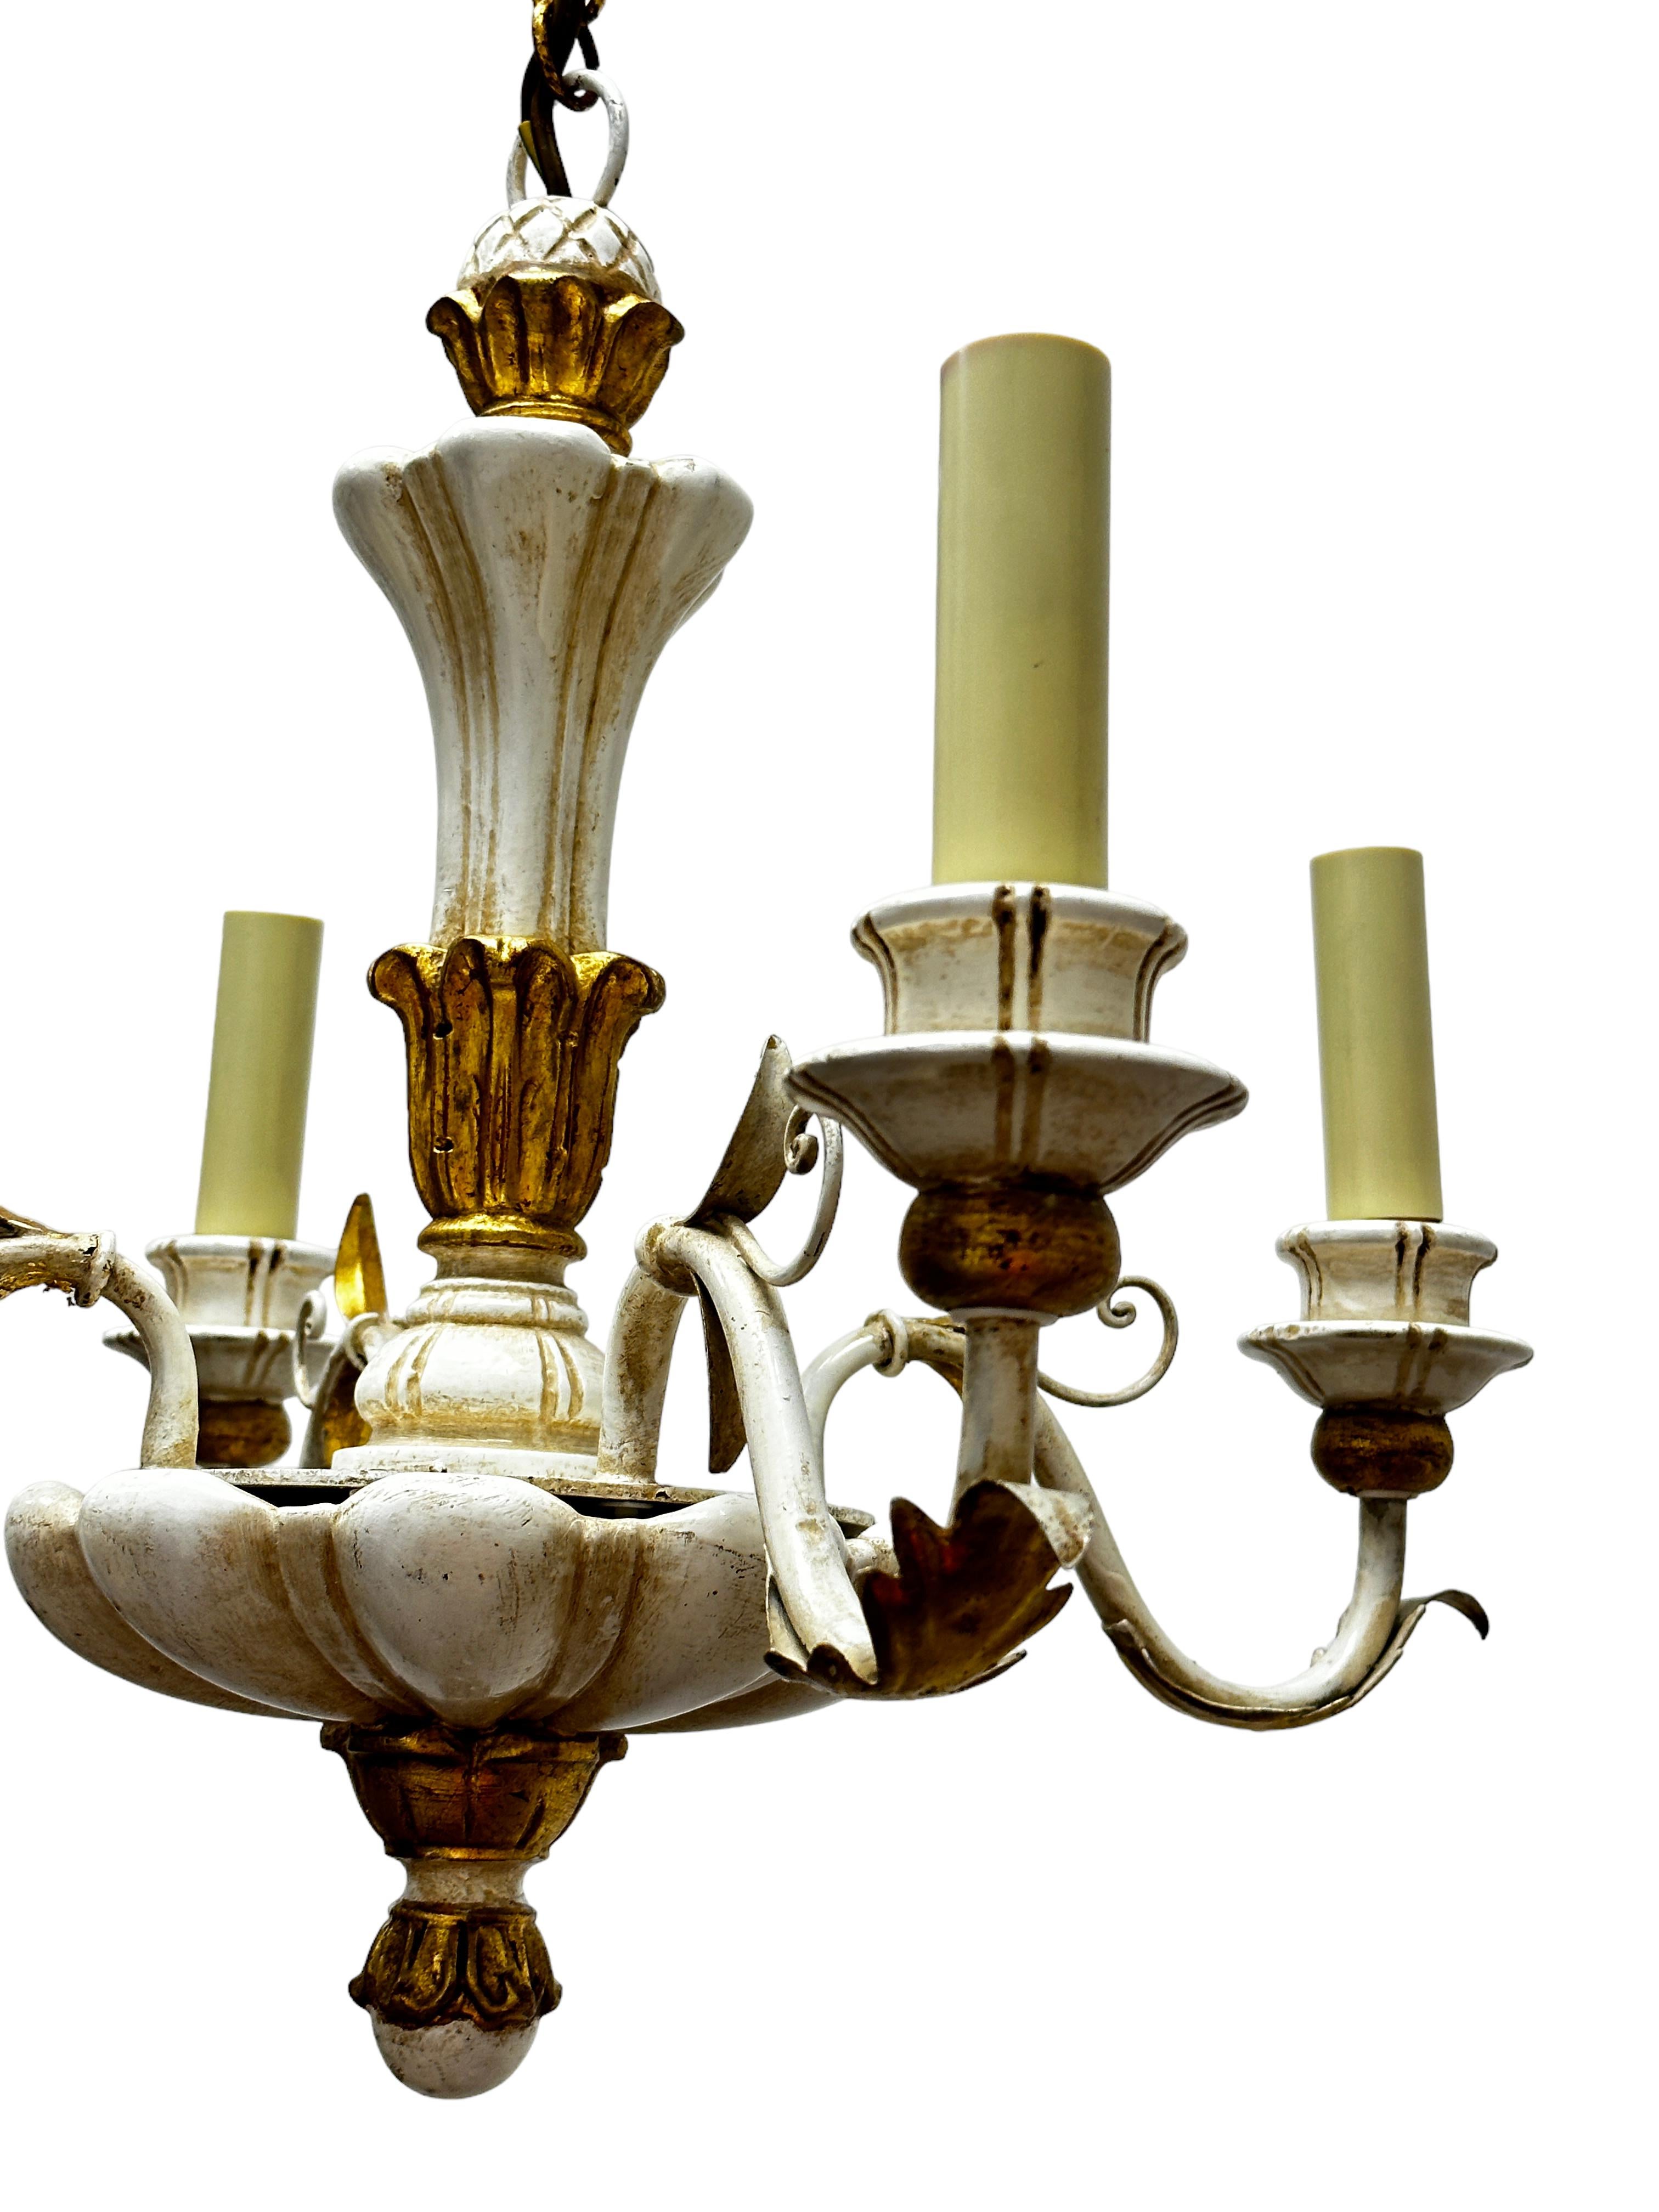 Add a touch of opulence to your home with this charming chandelier! Perfect chippy white, gilt wood and hand carved chandelier to enhance any chic or eclectic home. We'd love to see it hanging at a dinning place as a charming welcome. The chain with